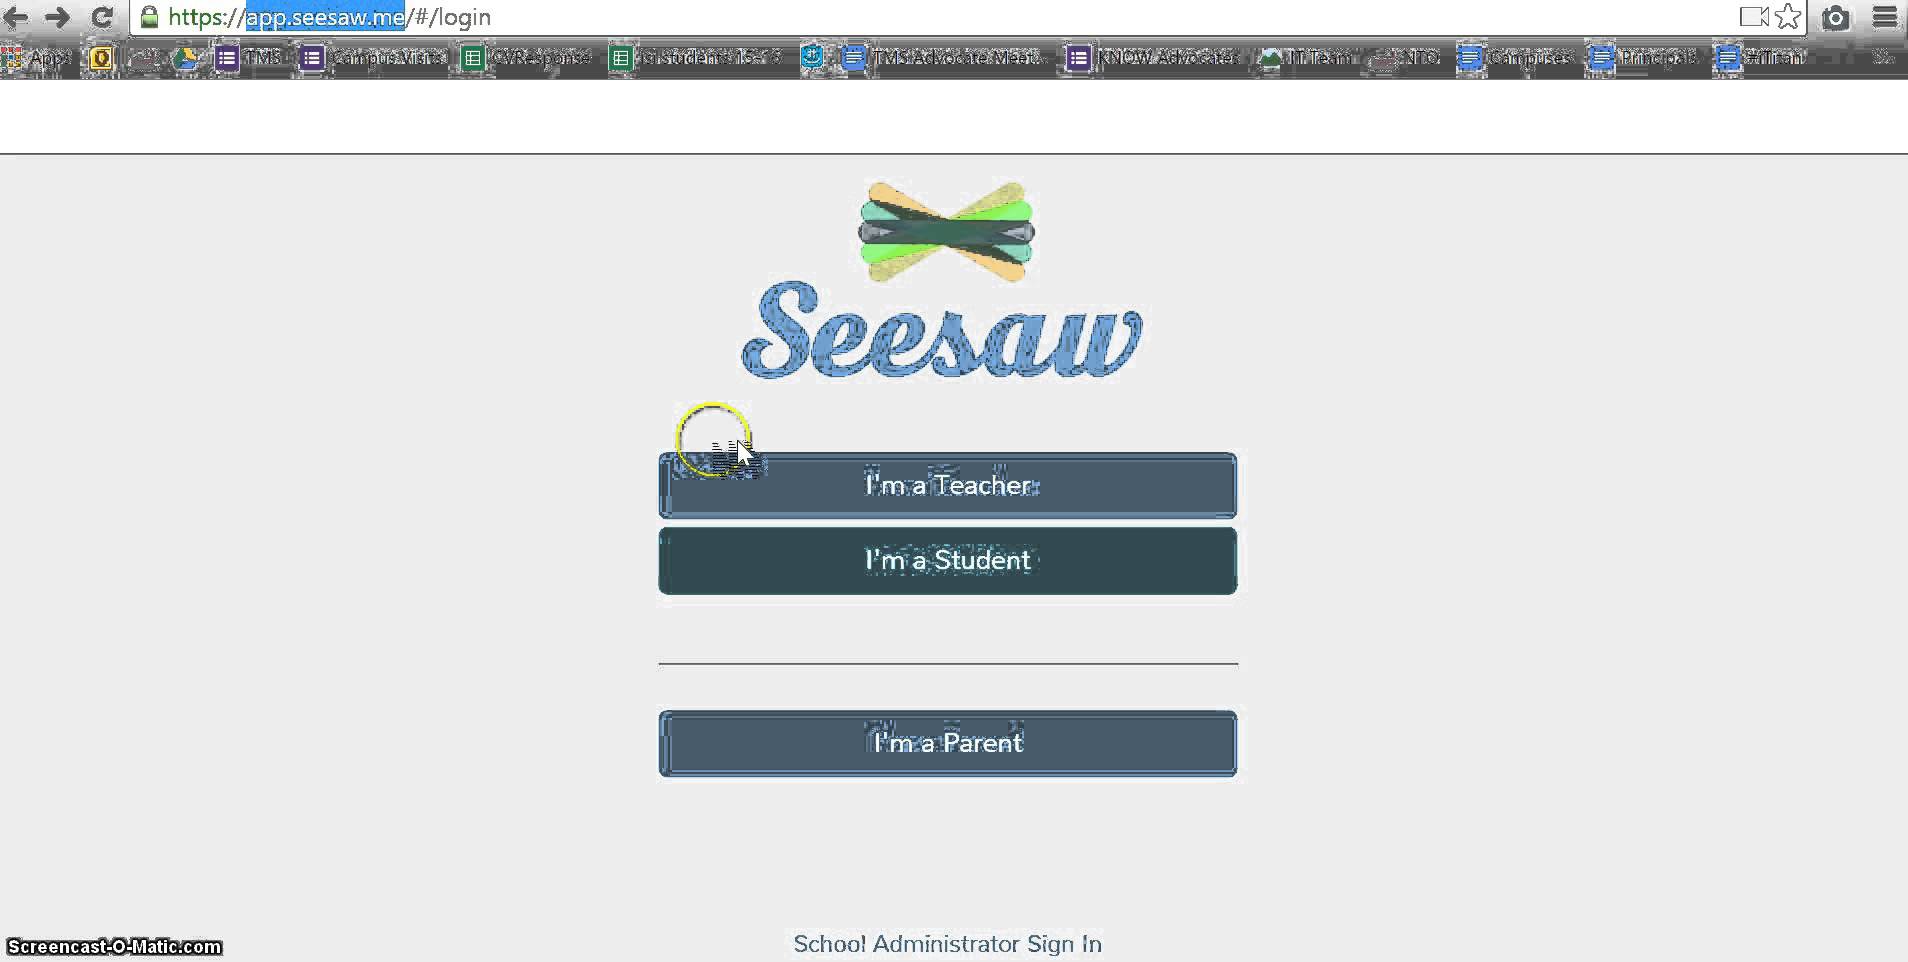 Seesaw vector sketch icon isolated on background. Hand drawn 